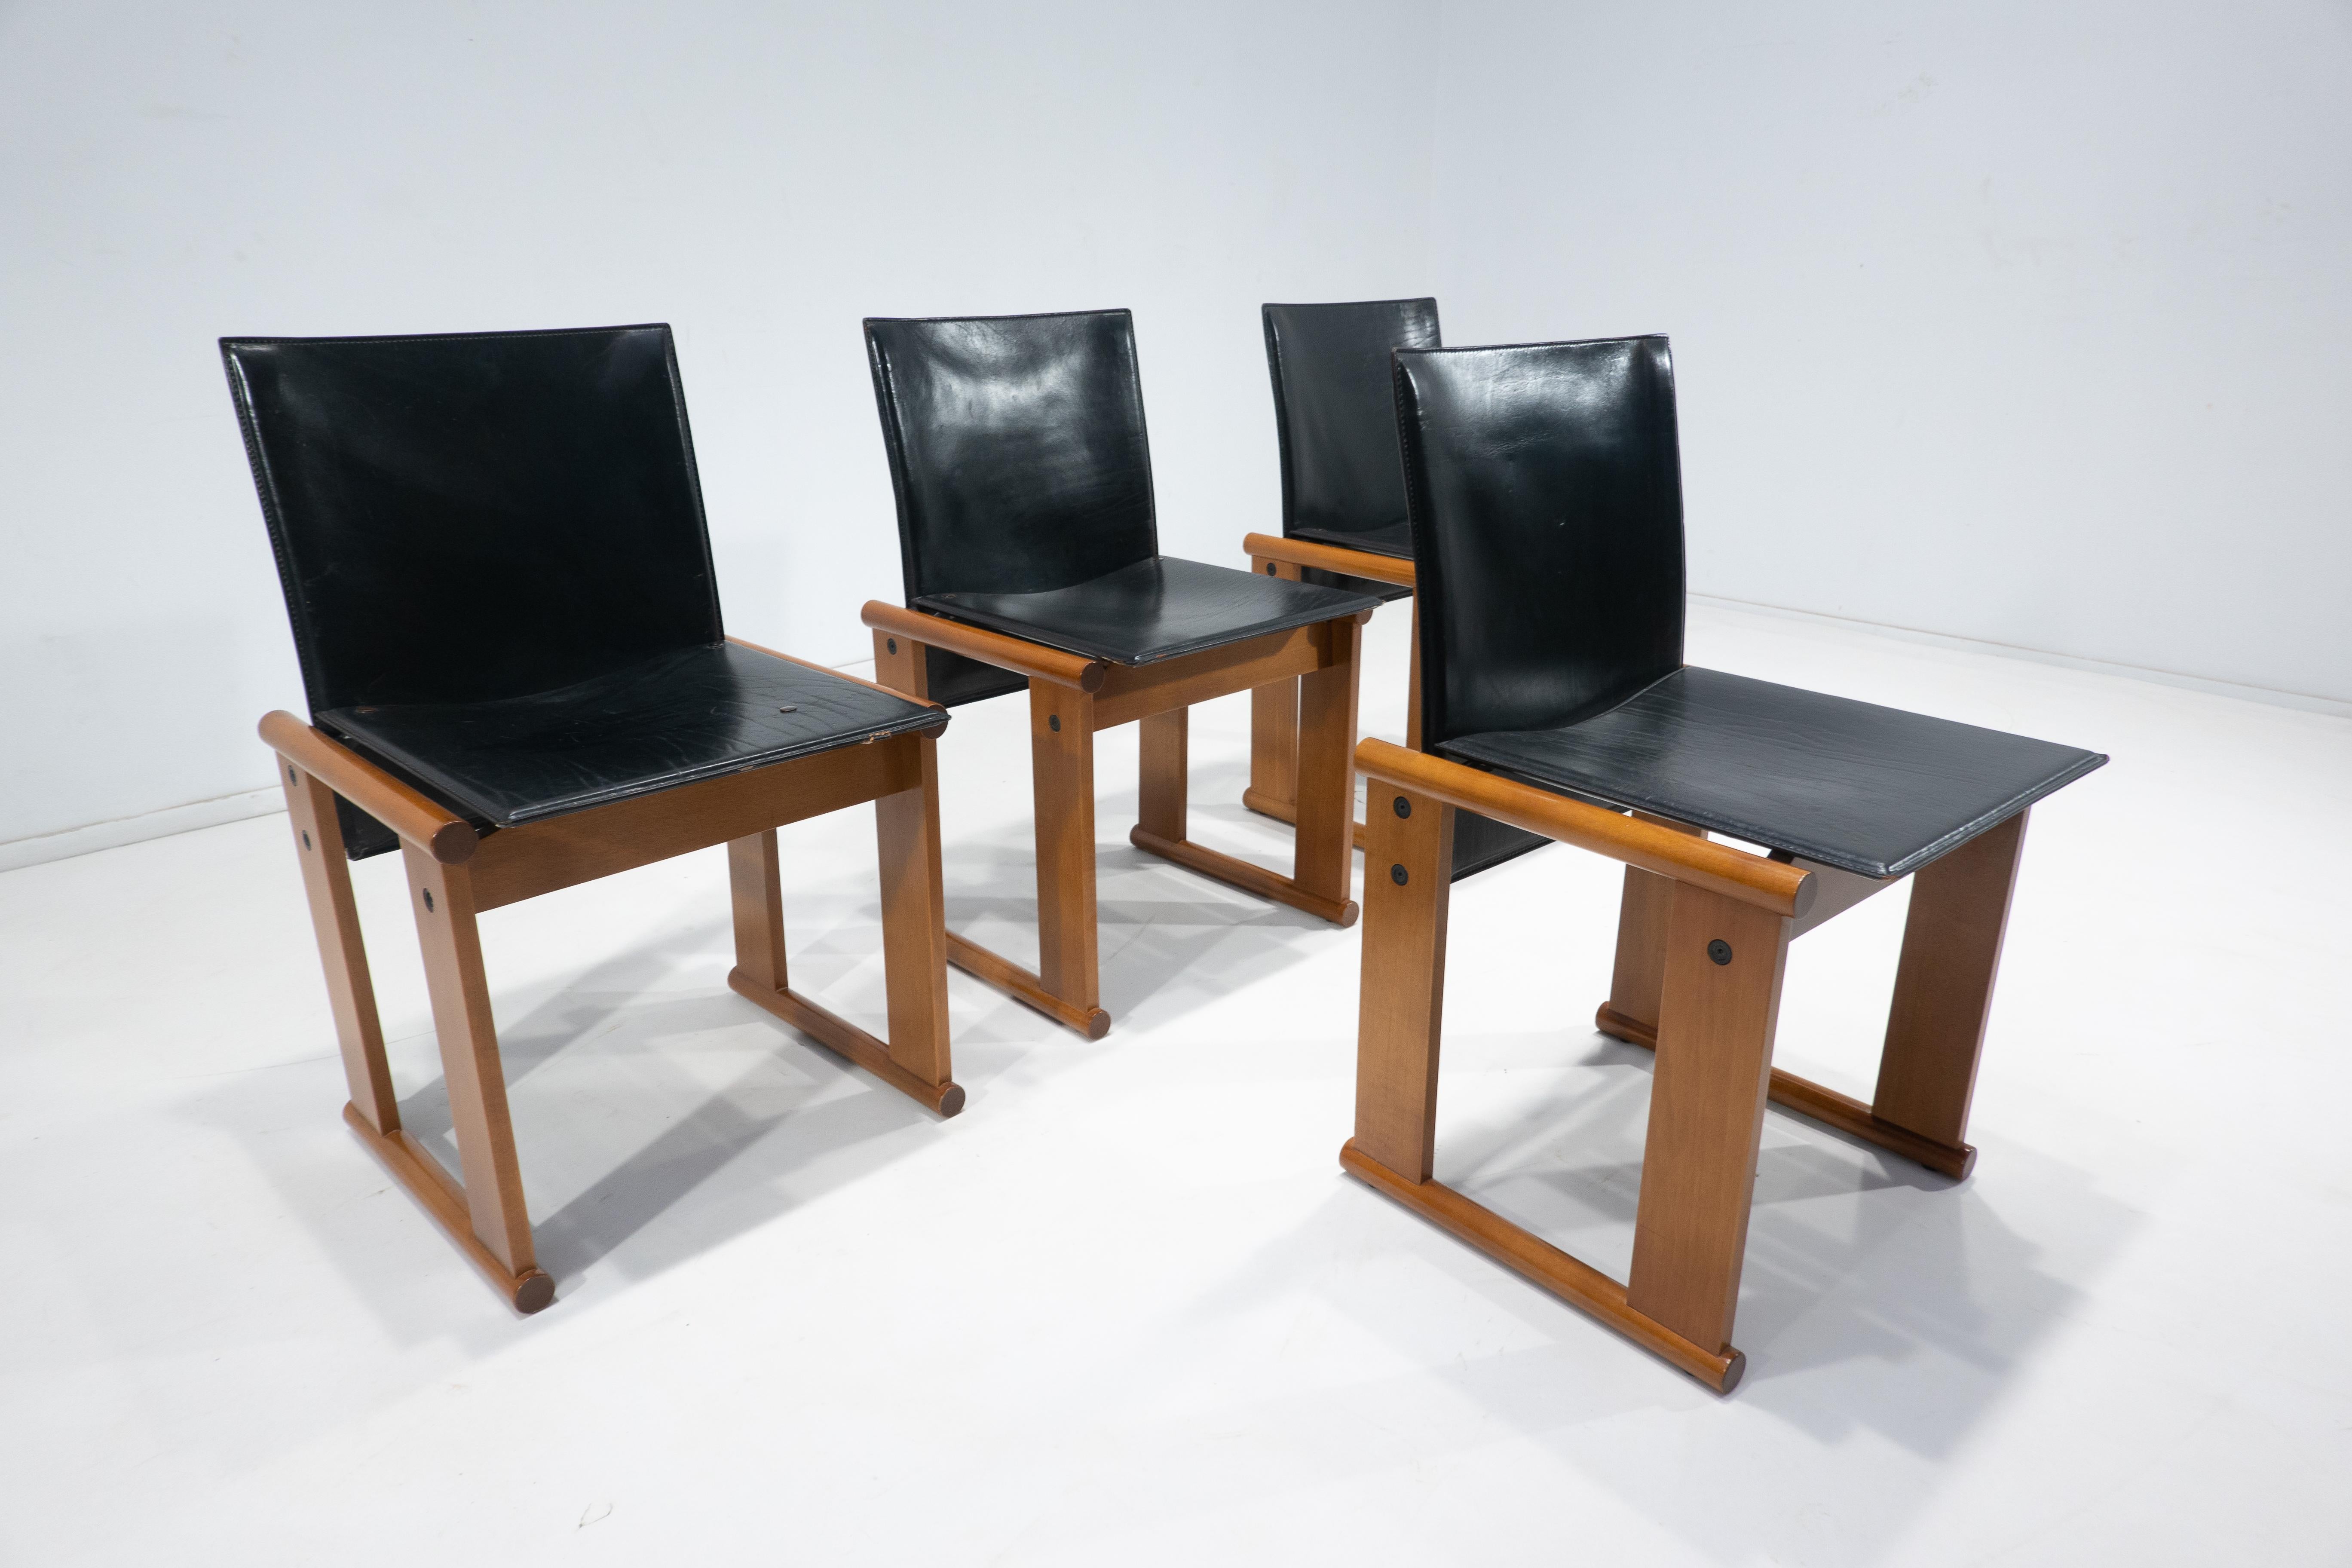 Leather Mid-Century Modern Set of 4 Chairs by Afra and Tobia Scarpa, Italy, 1960s For Sale